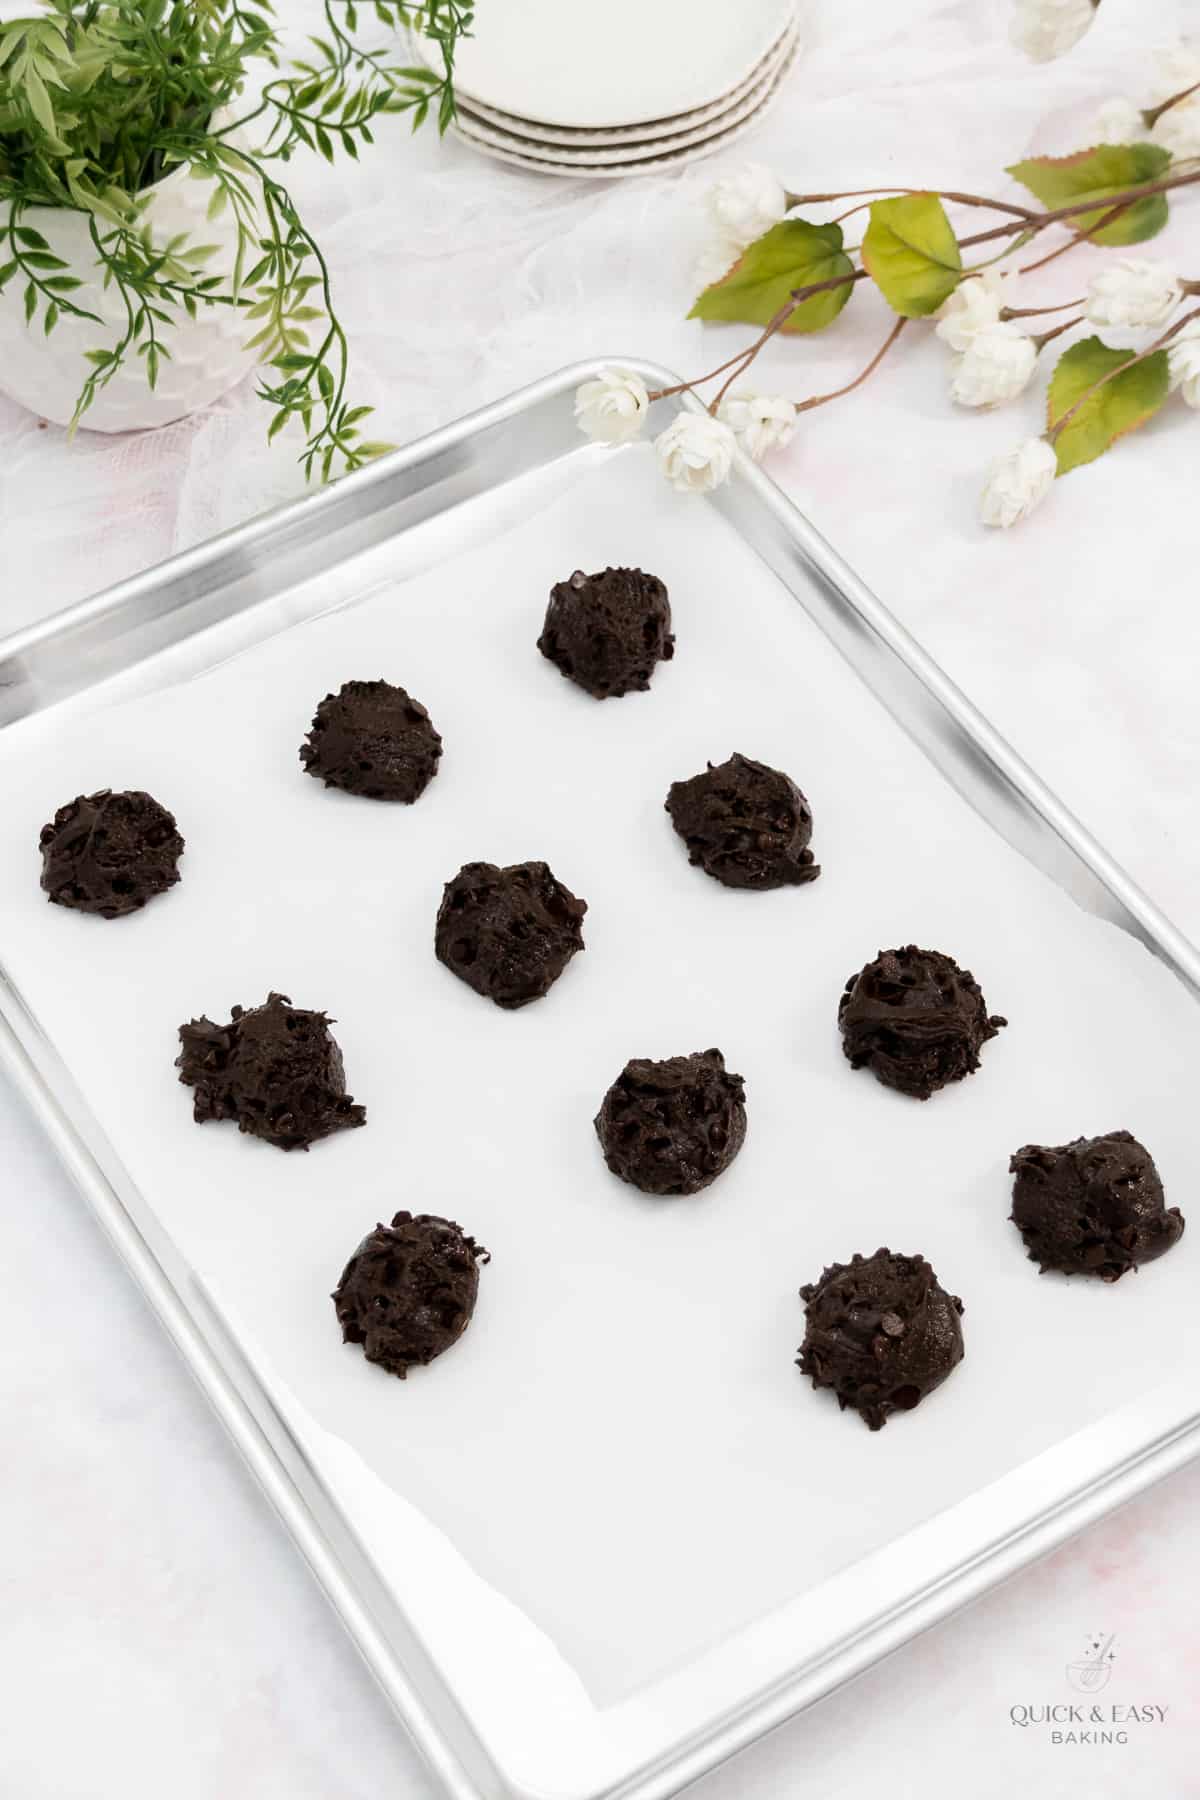 Chocolate mounds of batter on a parchment covered cookie sheet.